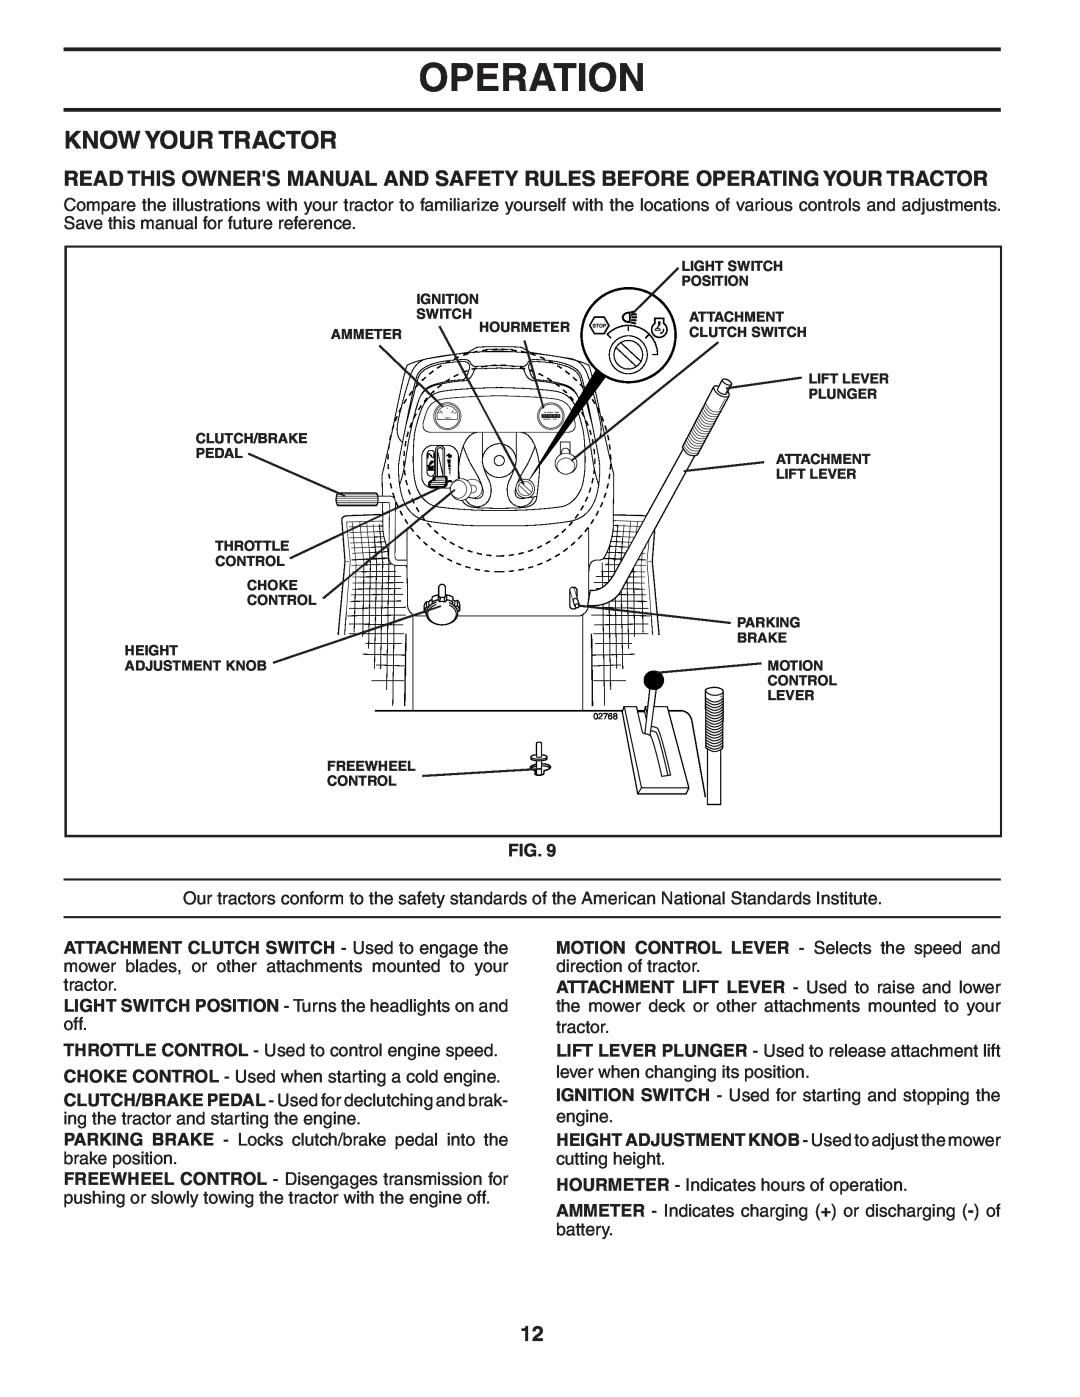 Husqvarna CTH180 XP owner manual Know Your Tractor, Operation 